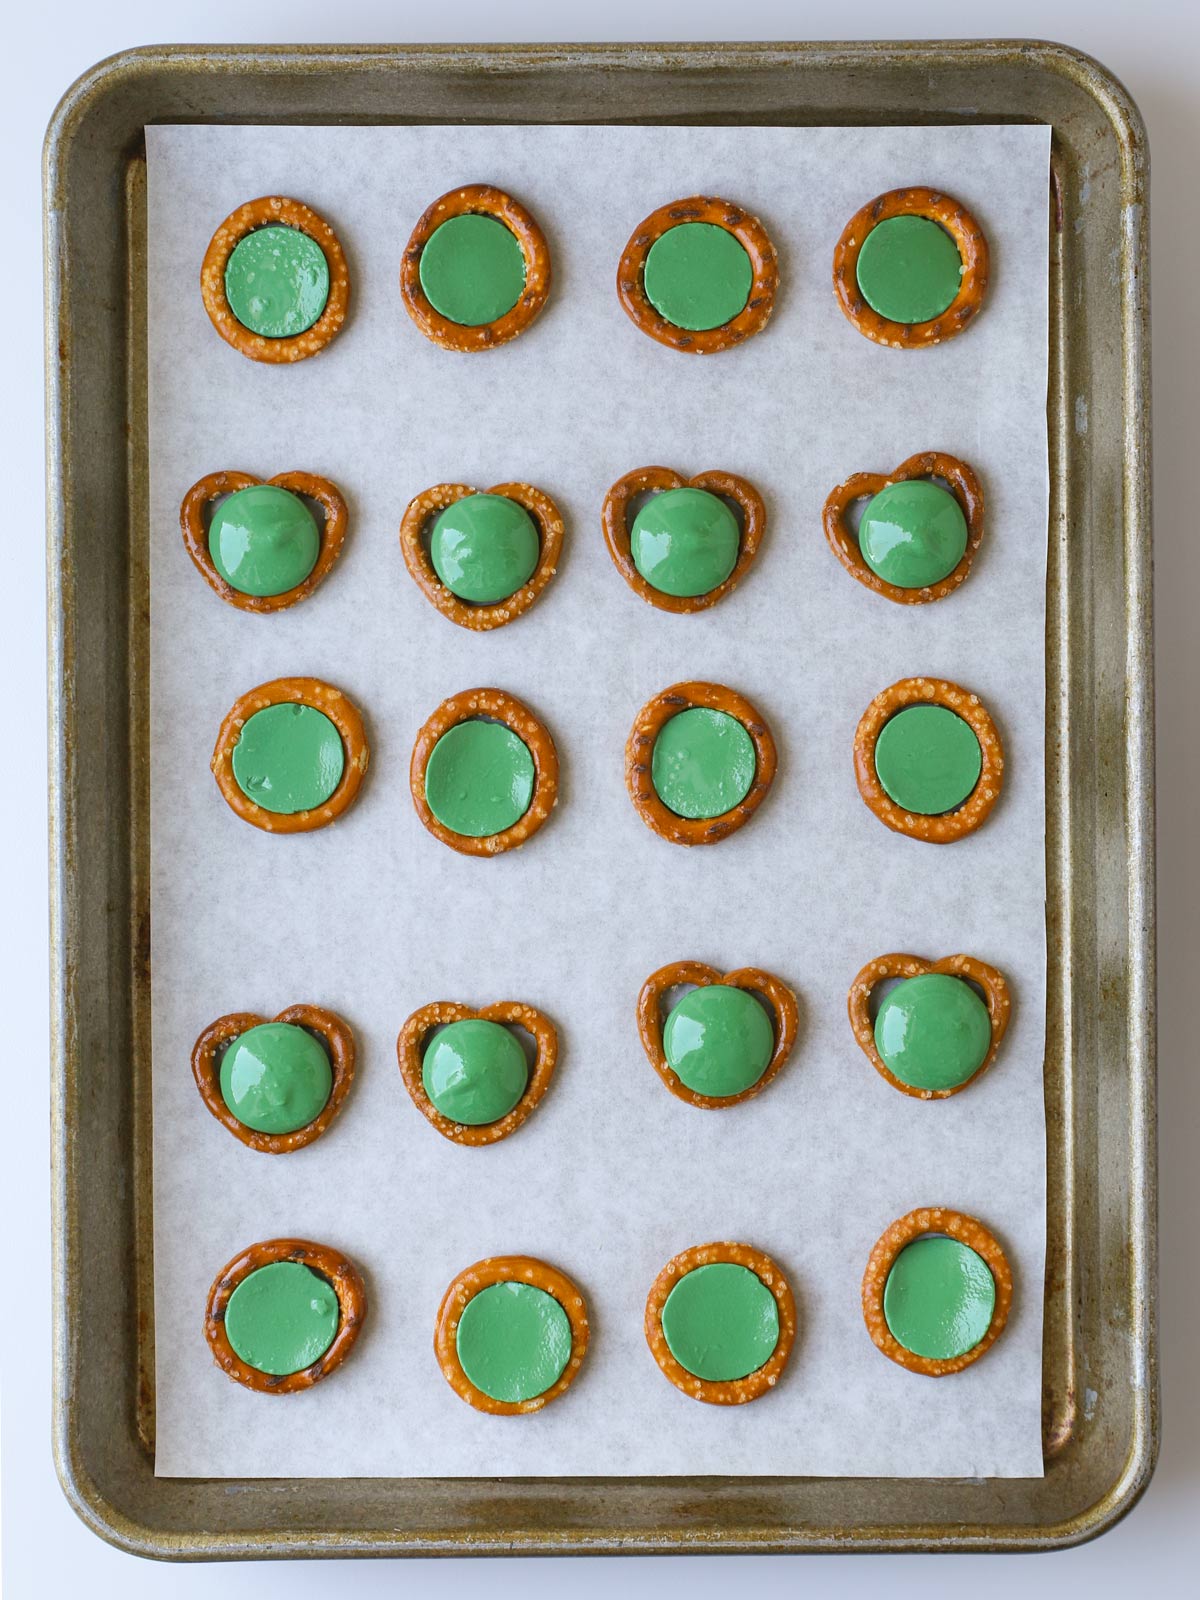 green candy melts laid atop the pretzels.